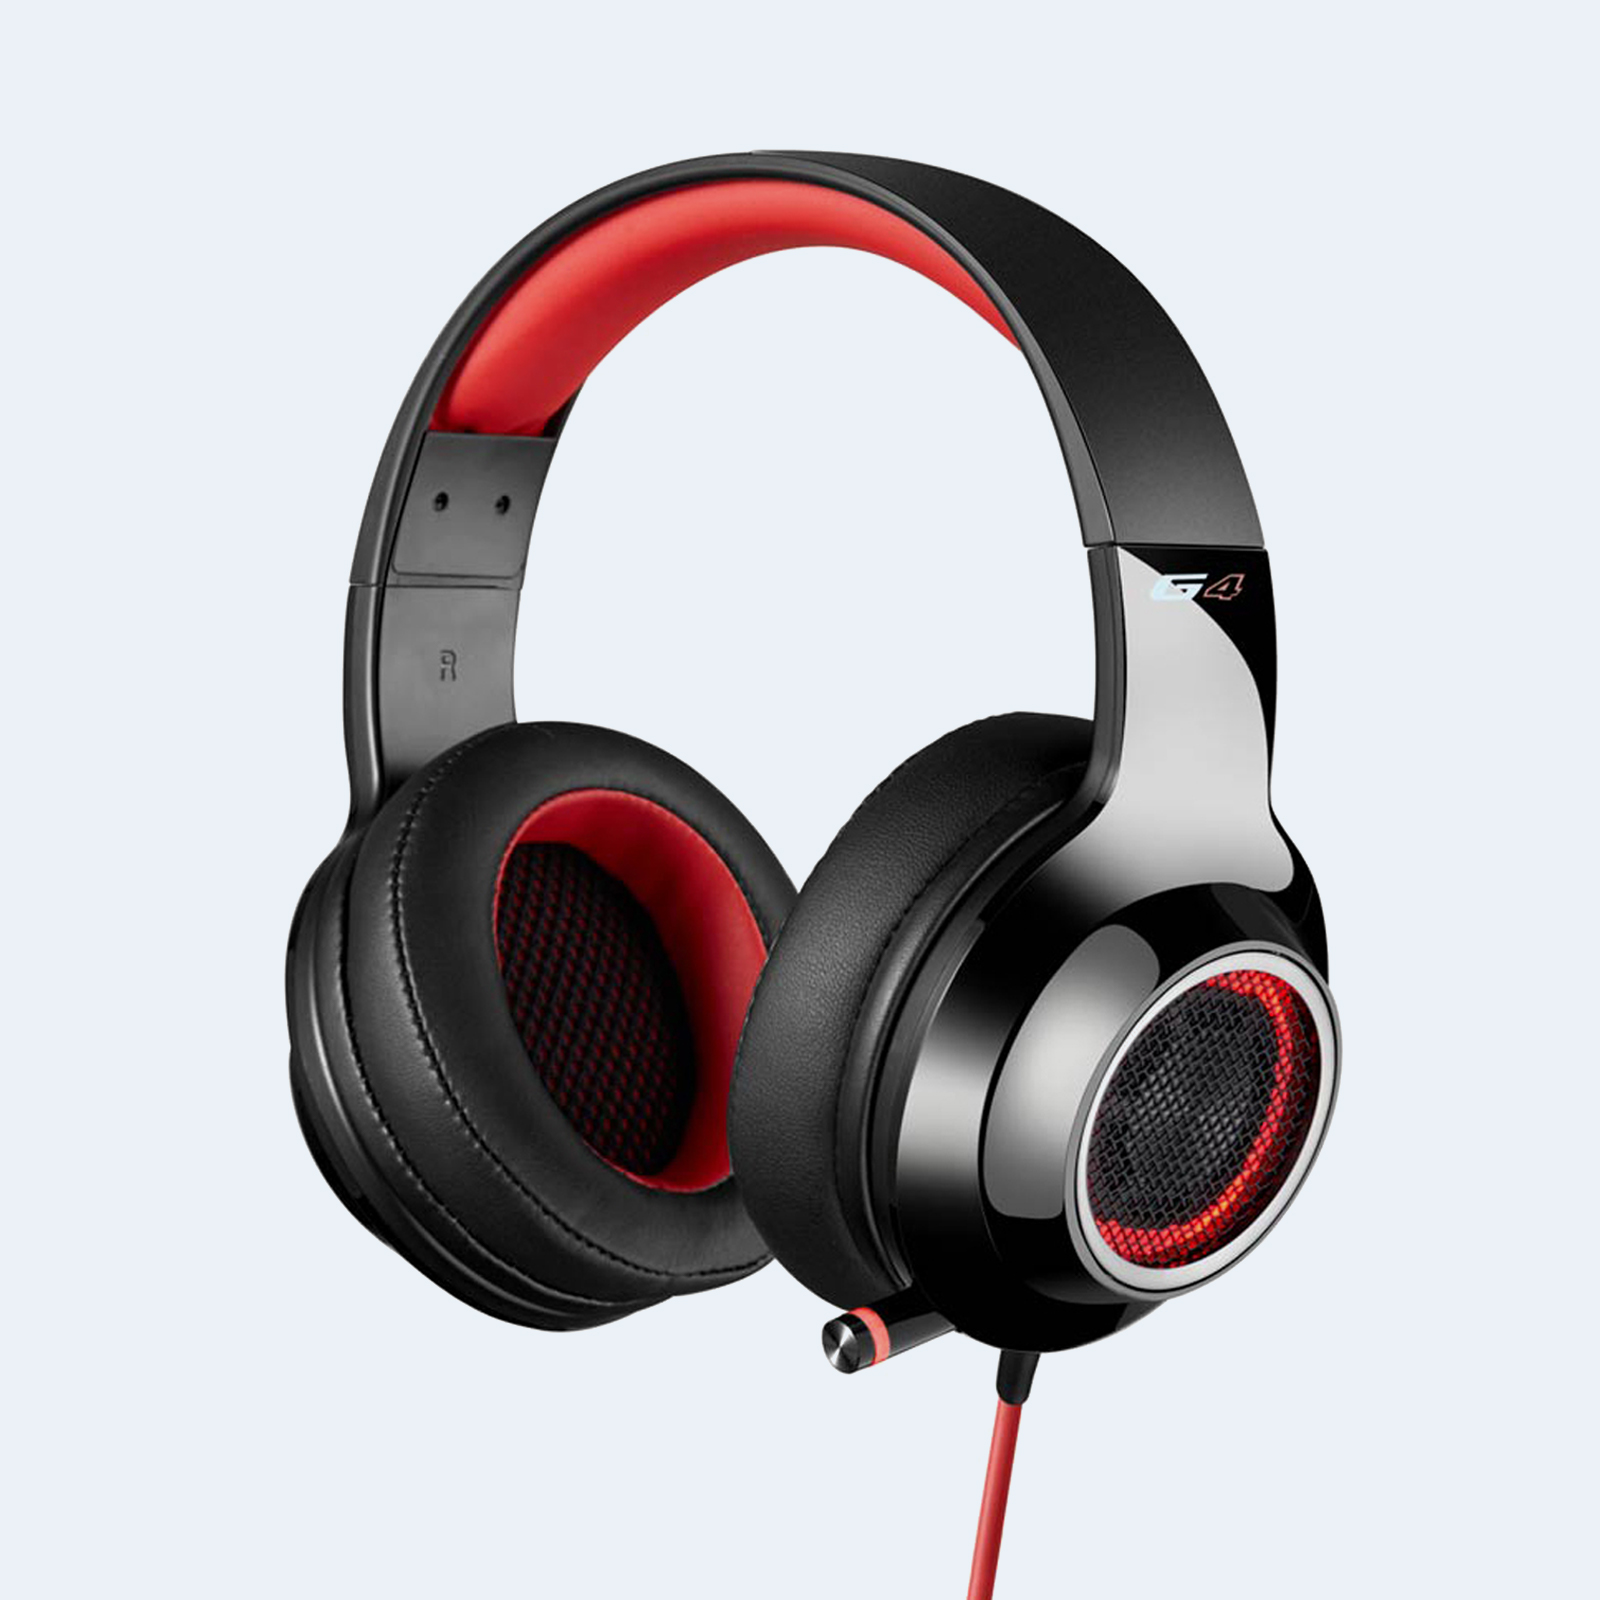 Edifier: G4 Noise isolating, surround sound gaming headphones designed to elevate the user’s PC and laptop gaming experience